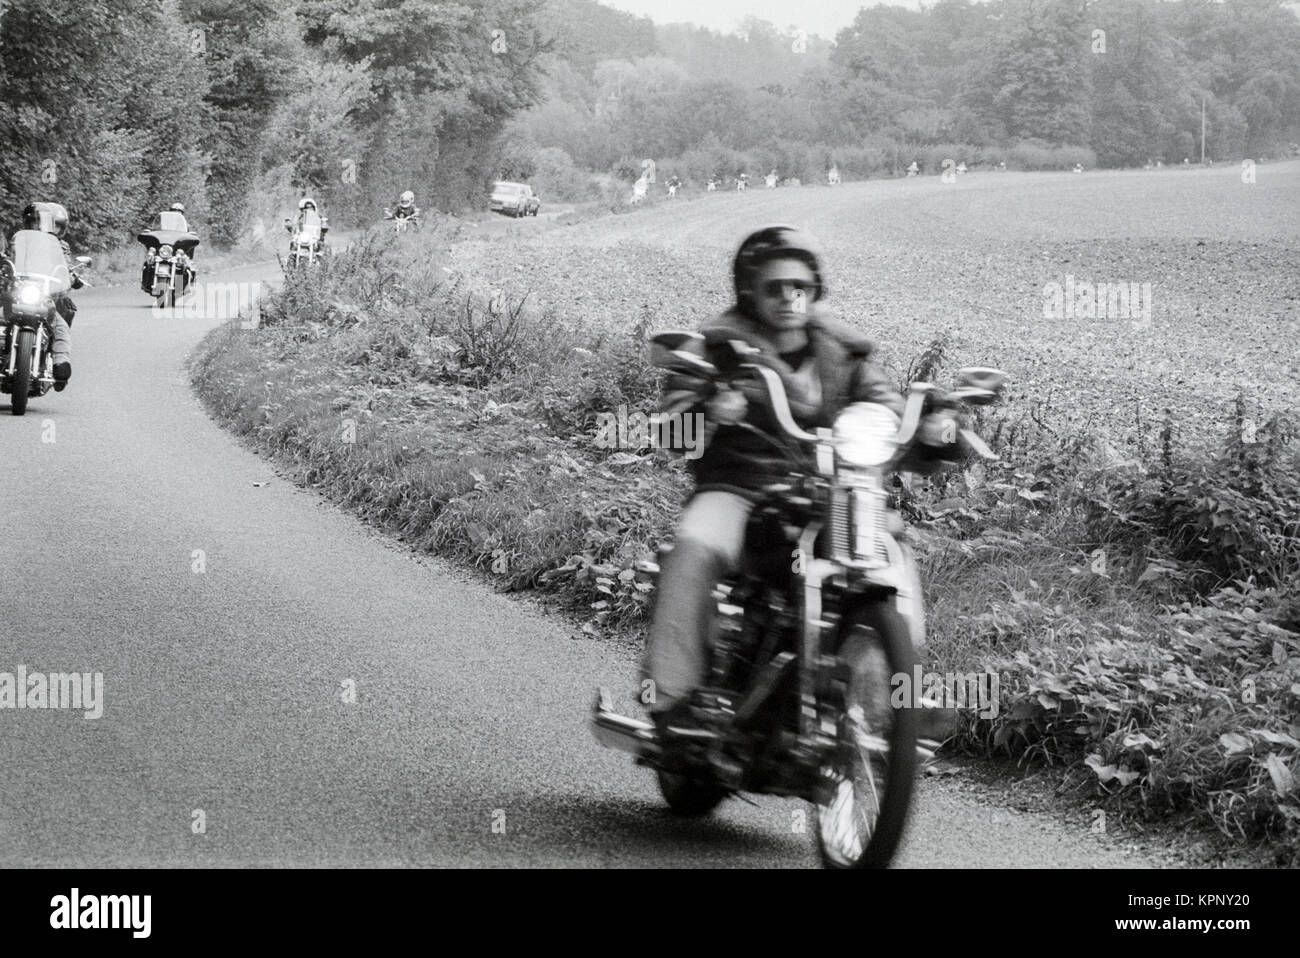 Bikers on a run out in the Berkshire countryside. Scenes from the Harley Davidson rally in the grounds of Littlecote House, Berkshire, England ion 30th September 1989. The rally was hosted by Peter de Savary who owned the house at that time. Stock Photo